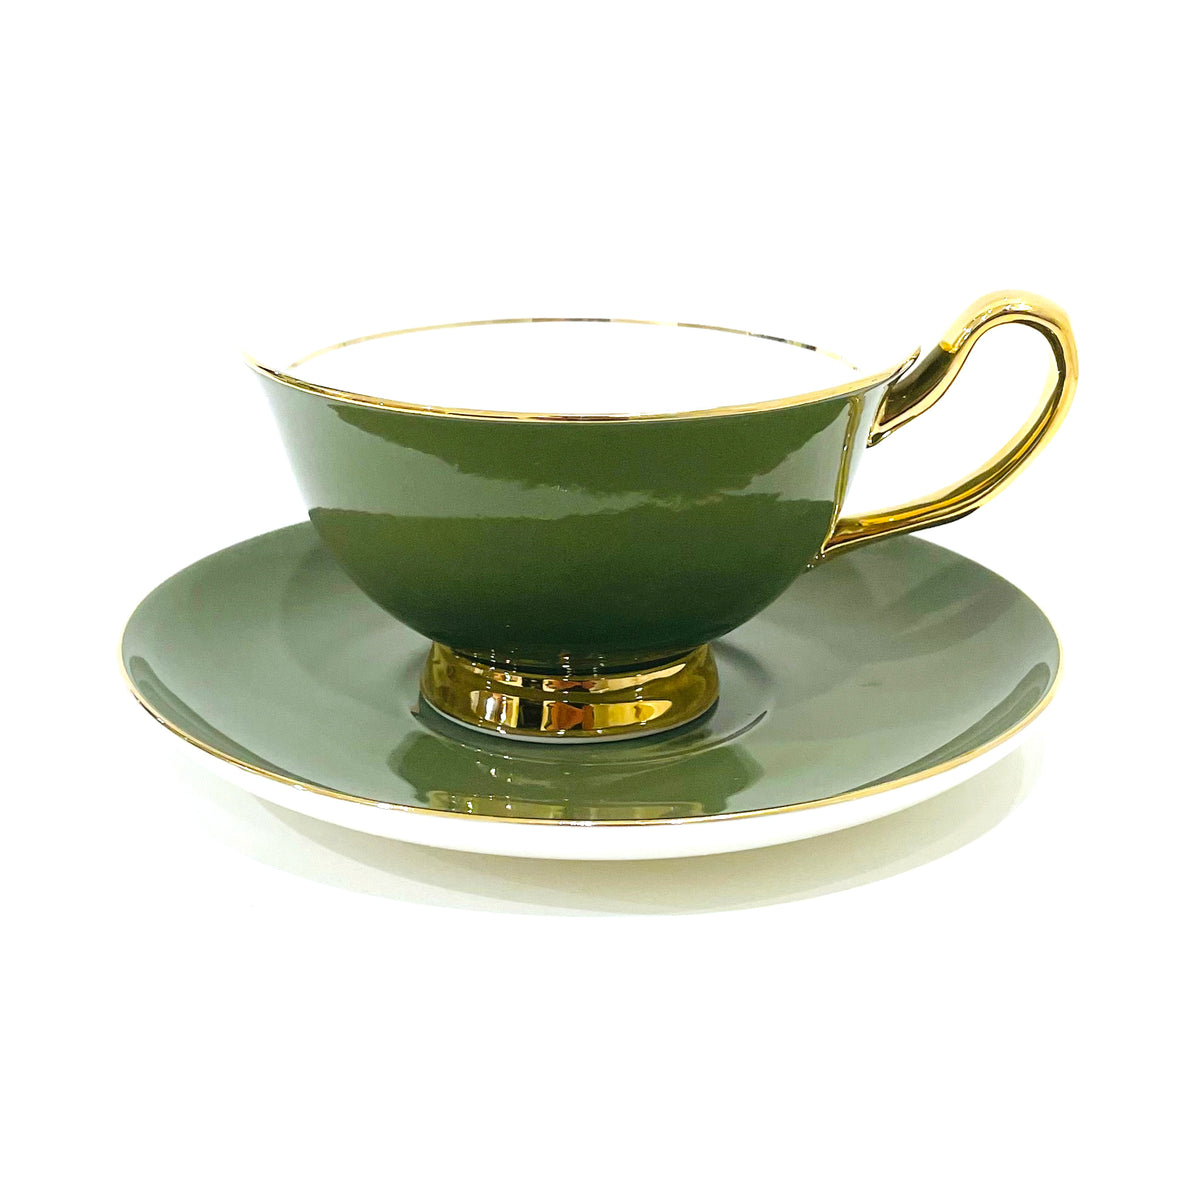 Olive Green Teacup and Saucer